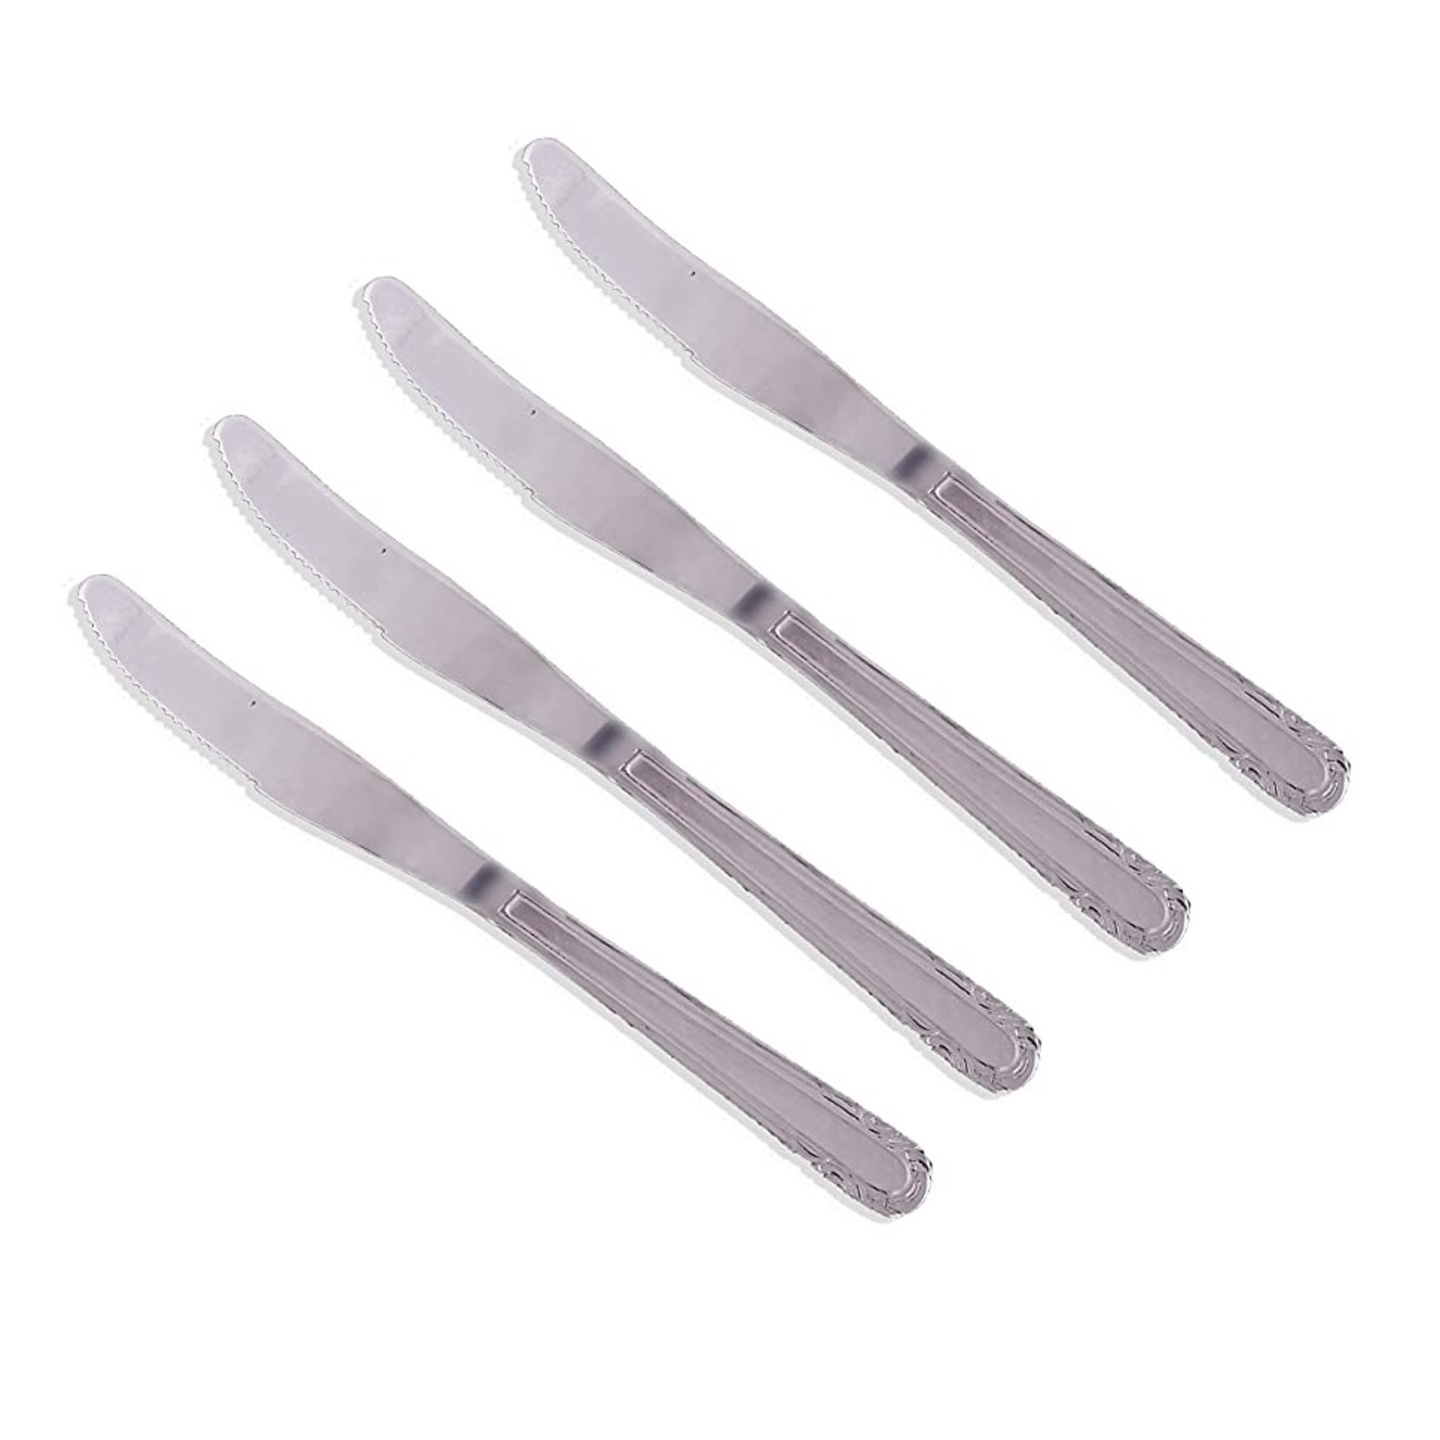 Classic Essentials Stainless Steel Knife Set (Pack of 4)